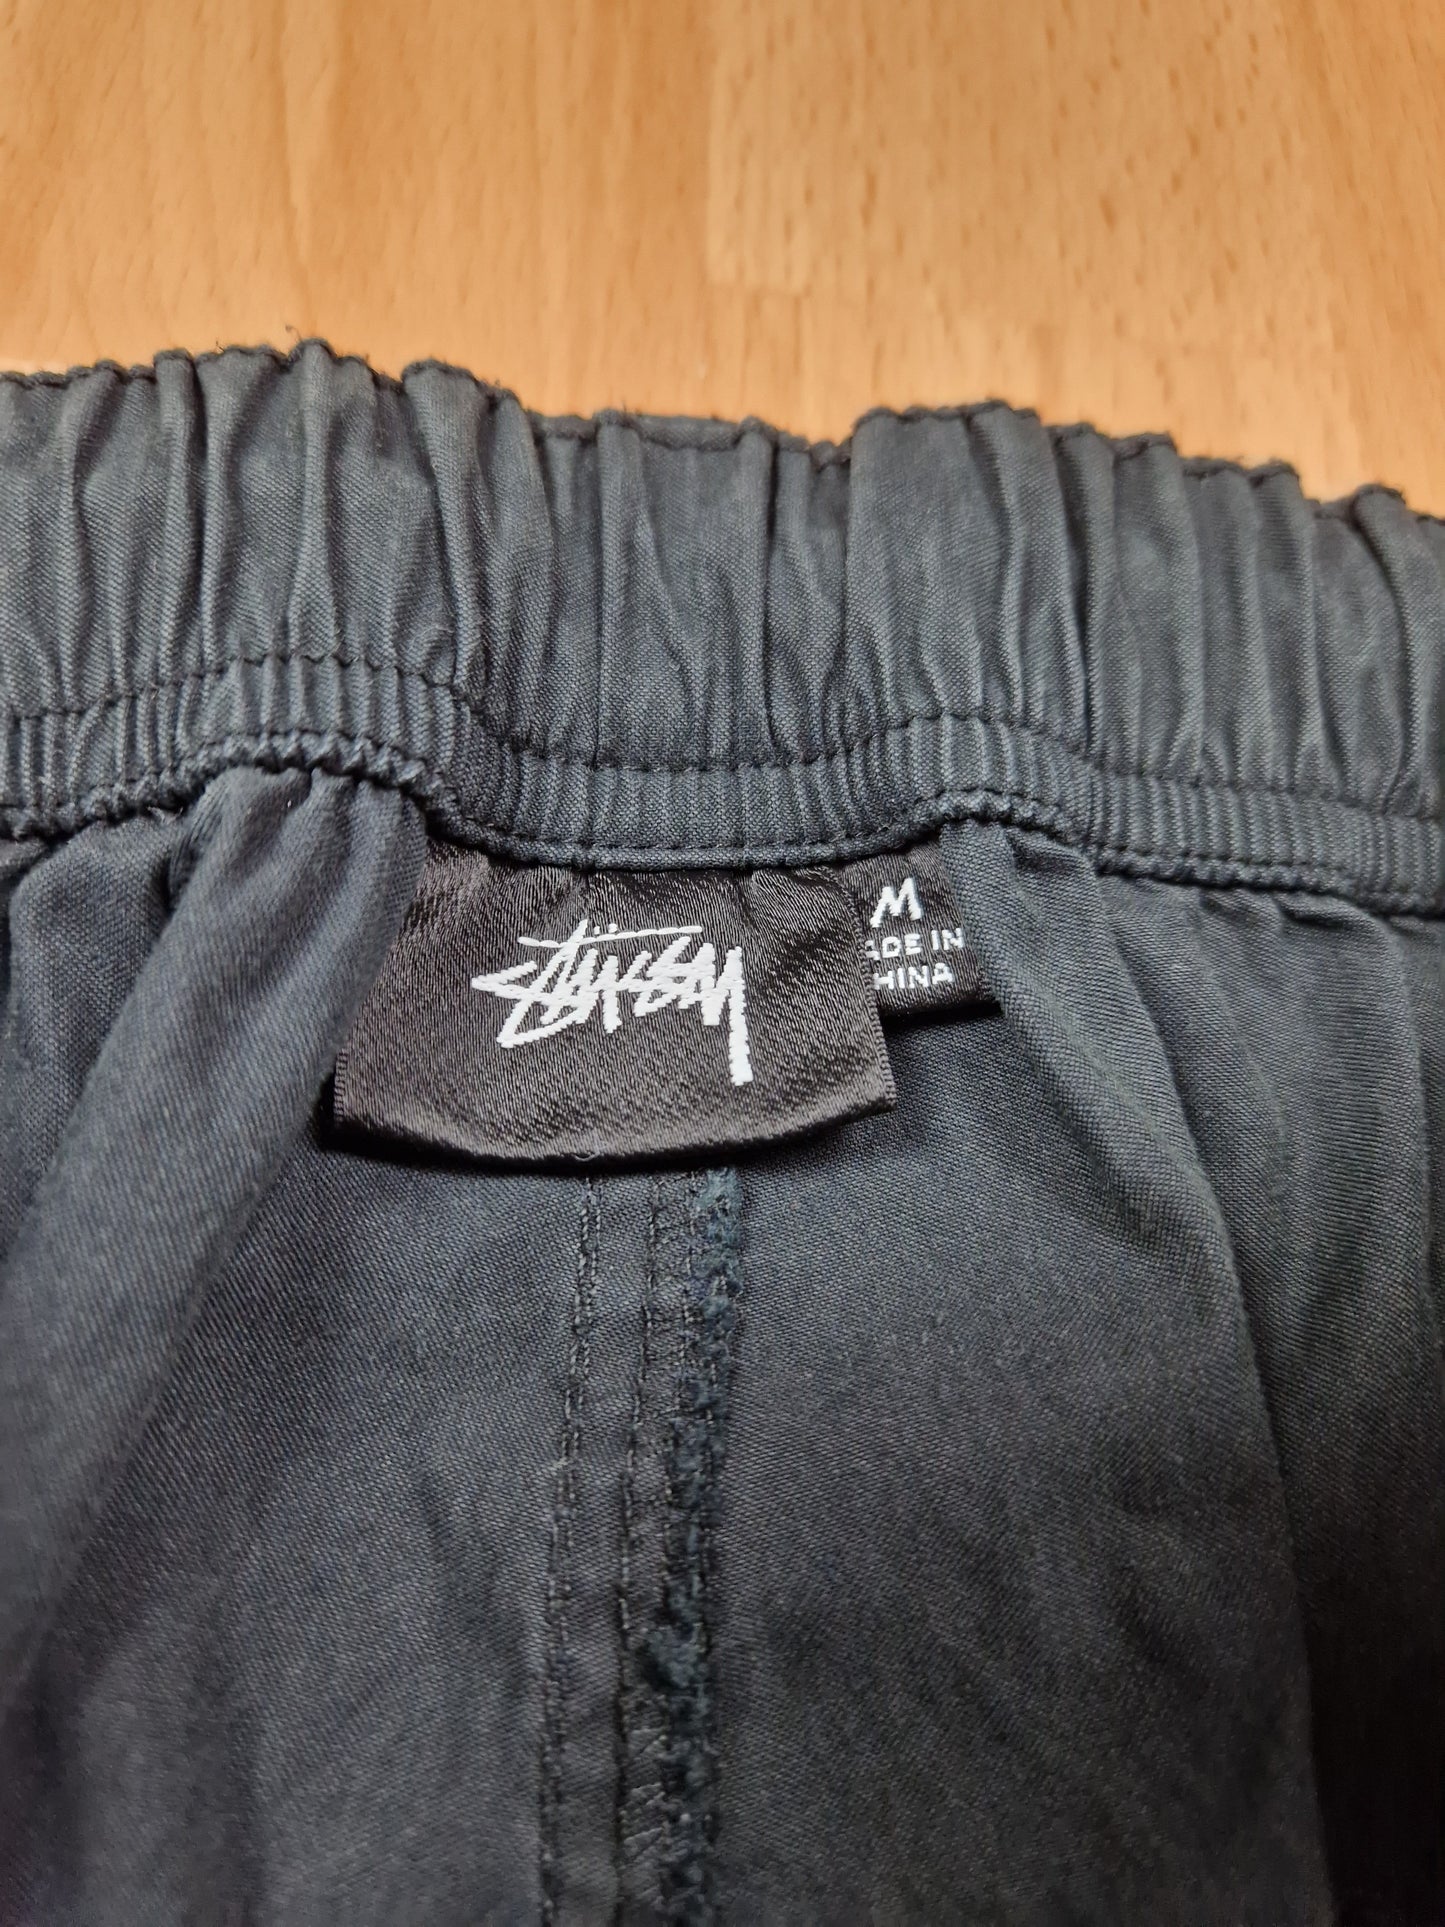 Stussy NYCO Over Trousers/Pants (M)